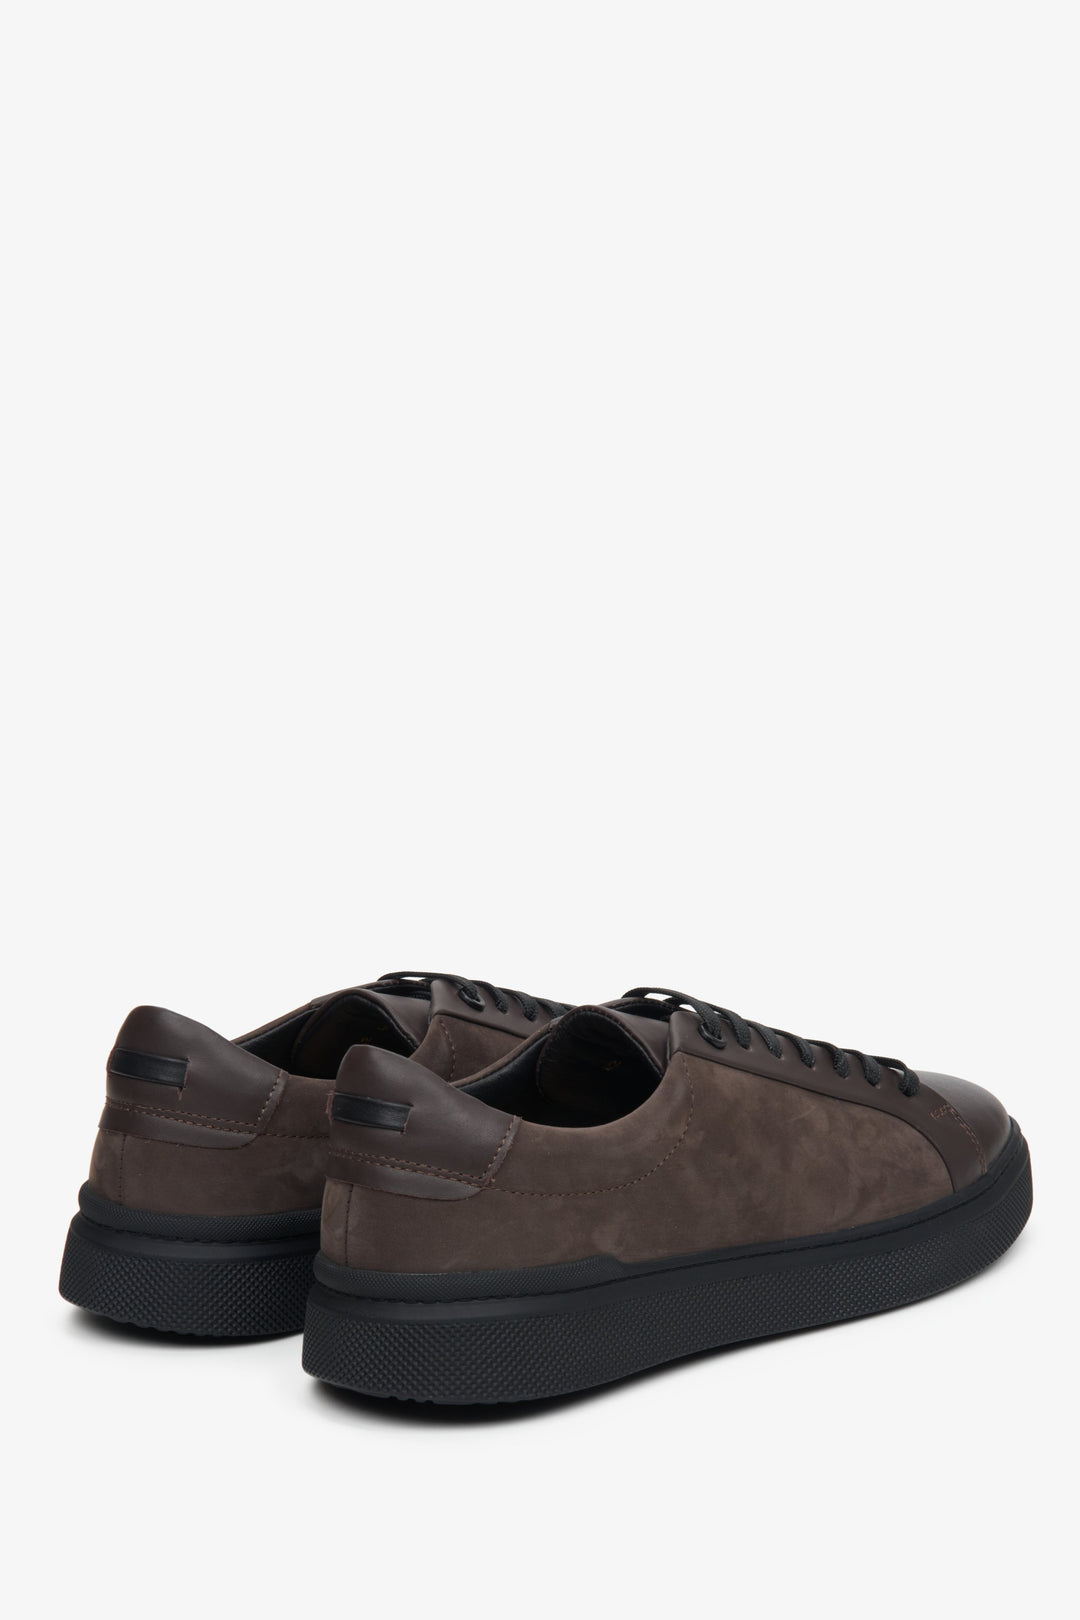 Brown men's sneakers made of genuine leather and suede Estro - close-up on the heel and side seam.